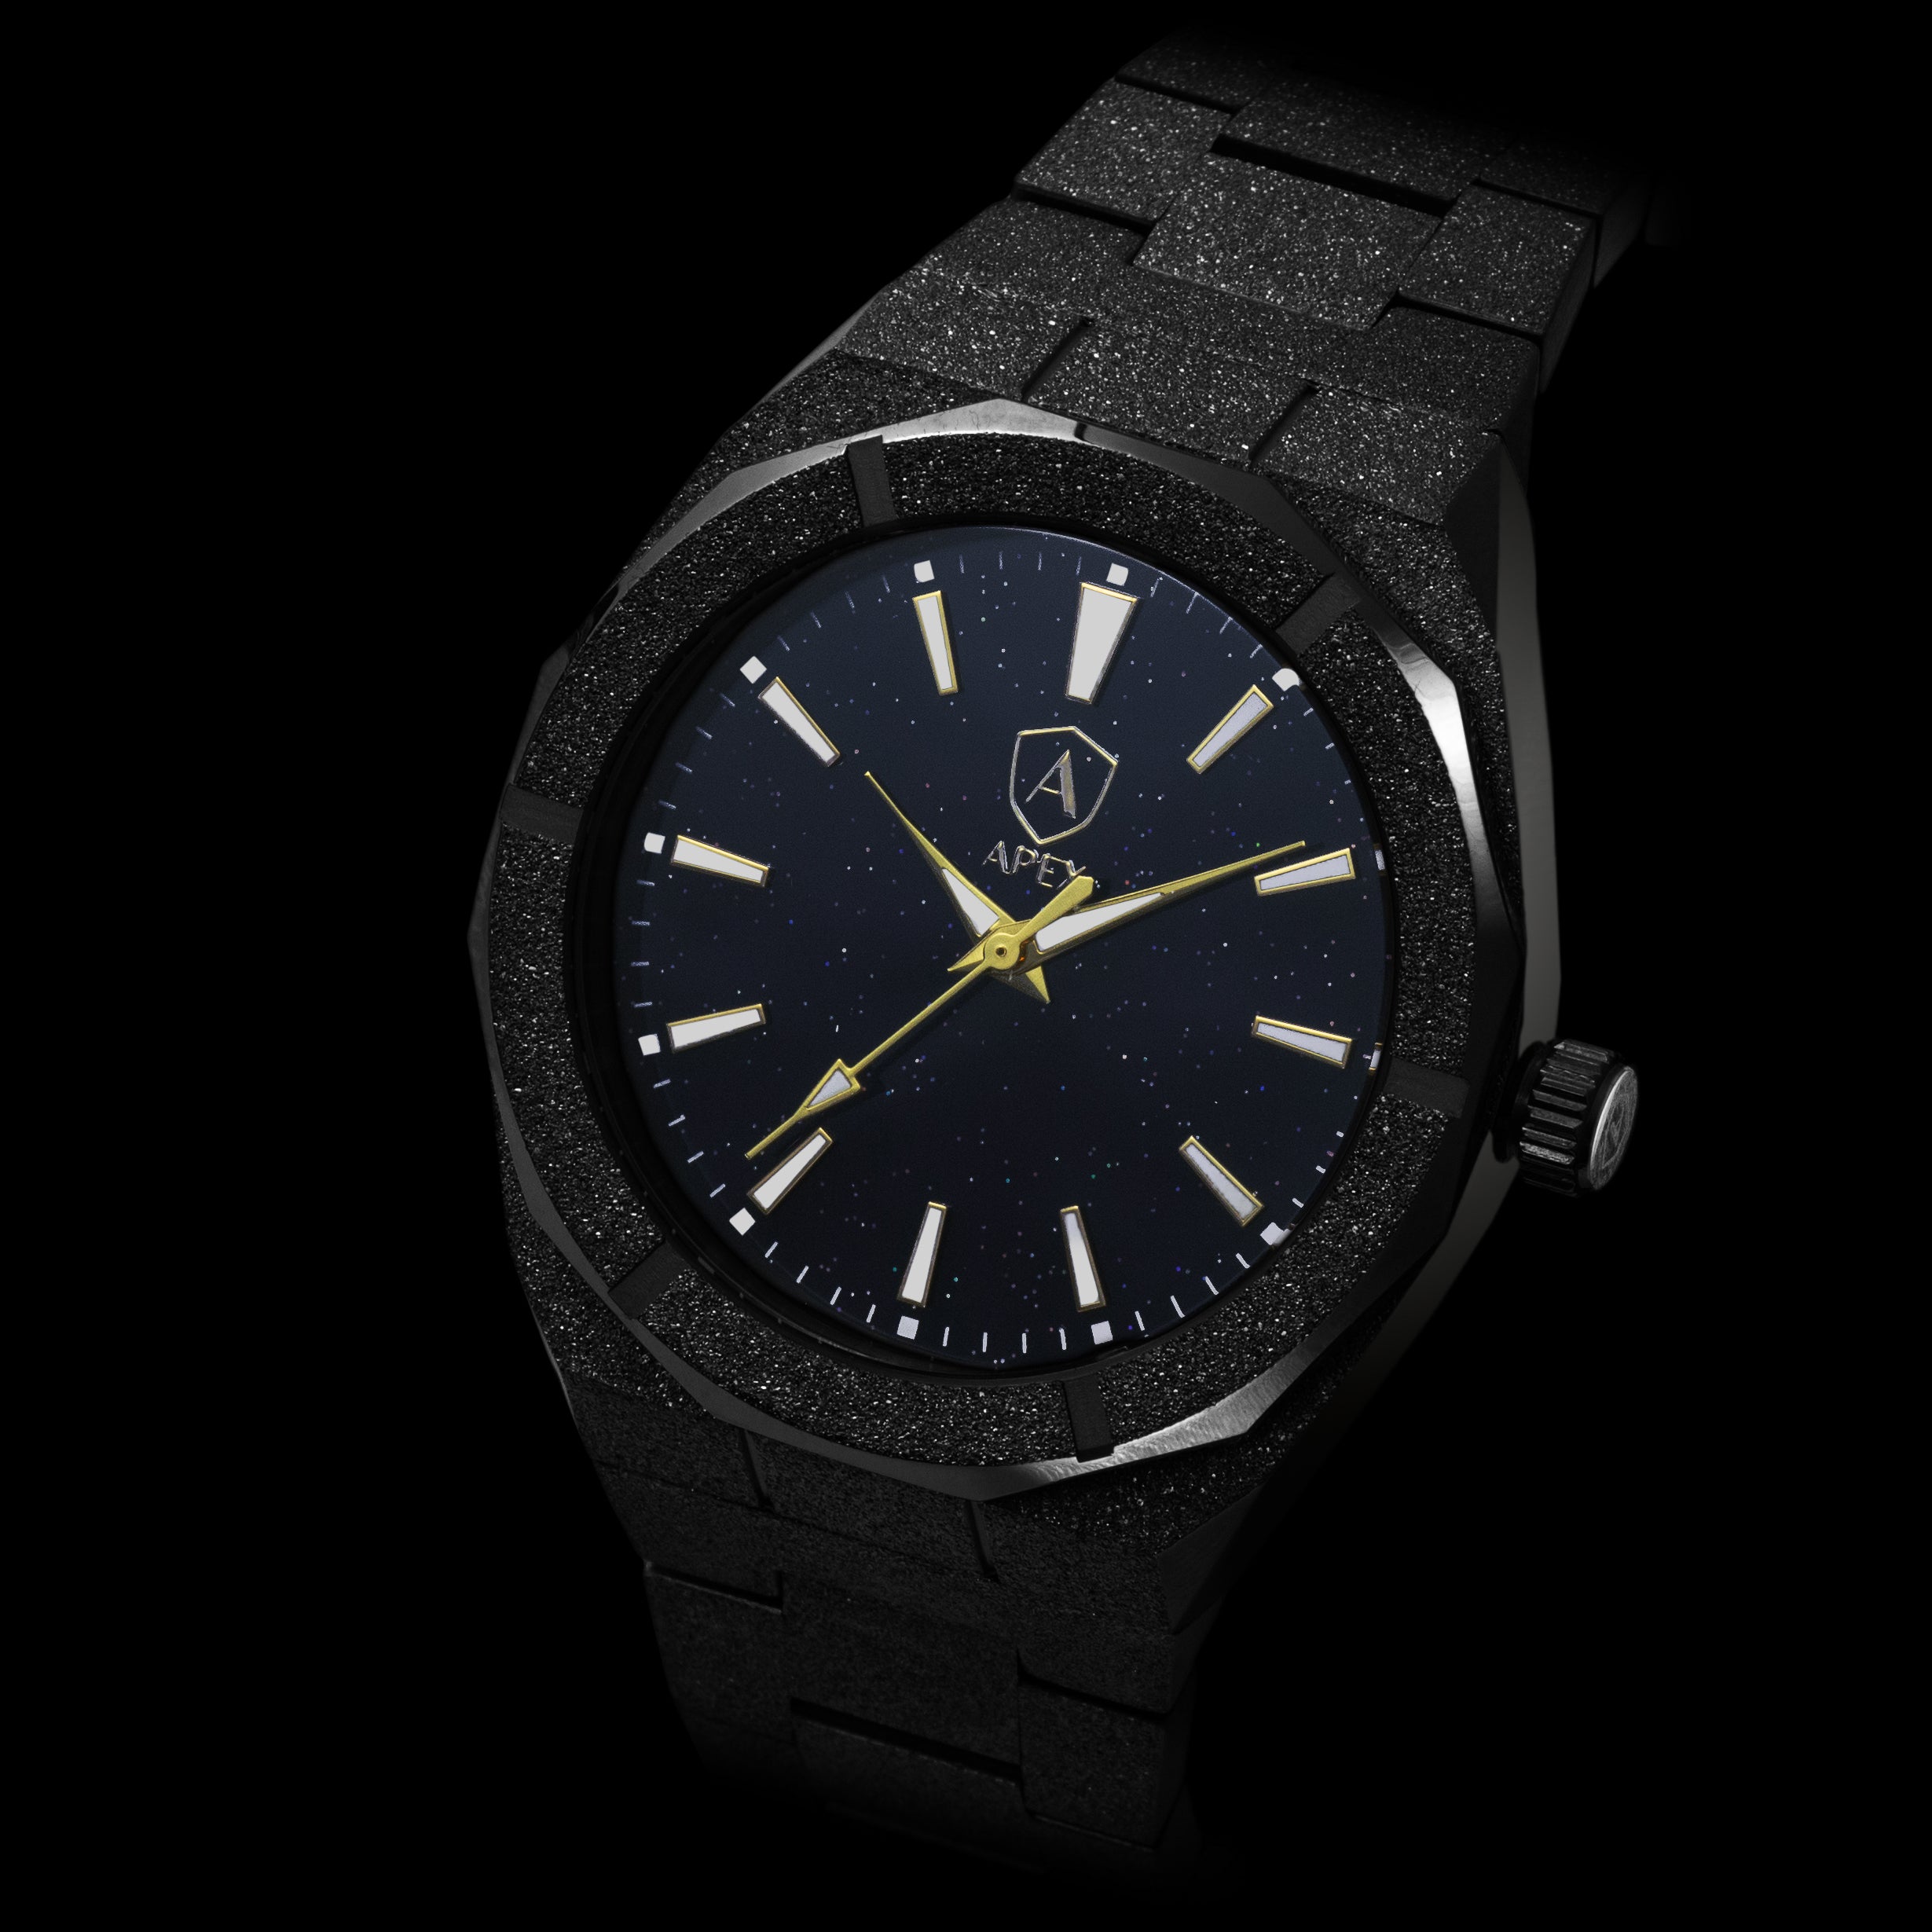 Stardust watches black watches for men